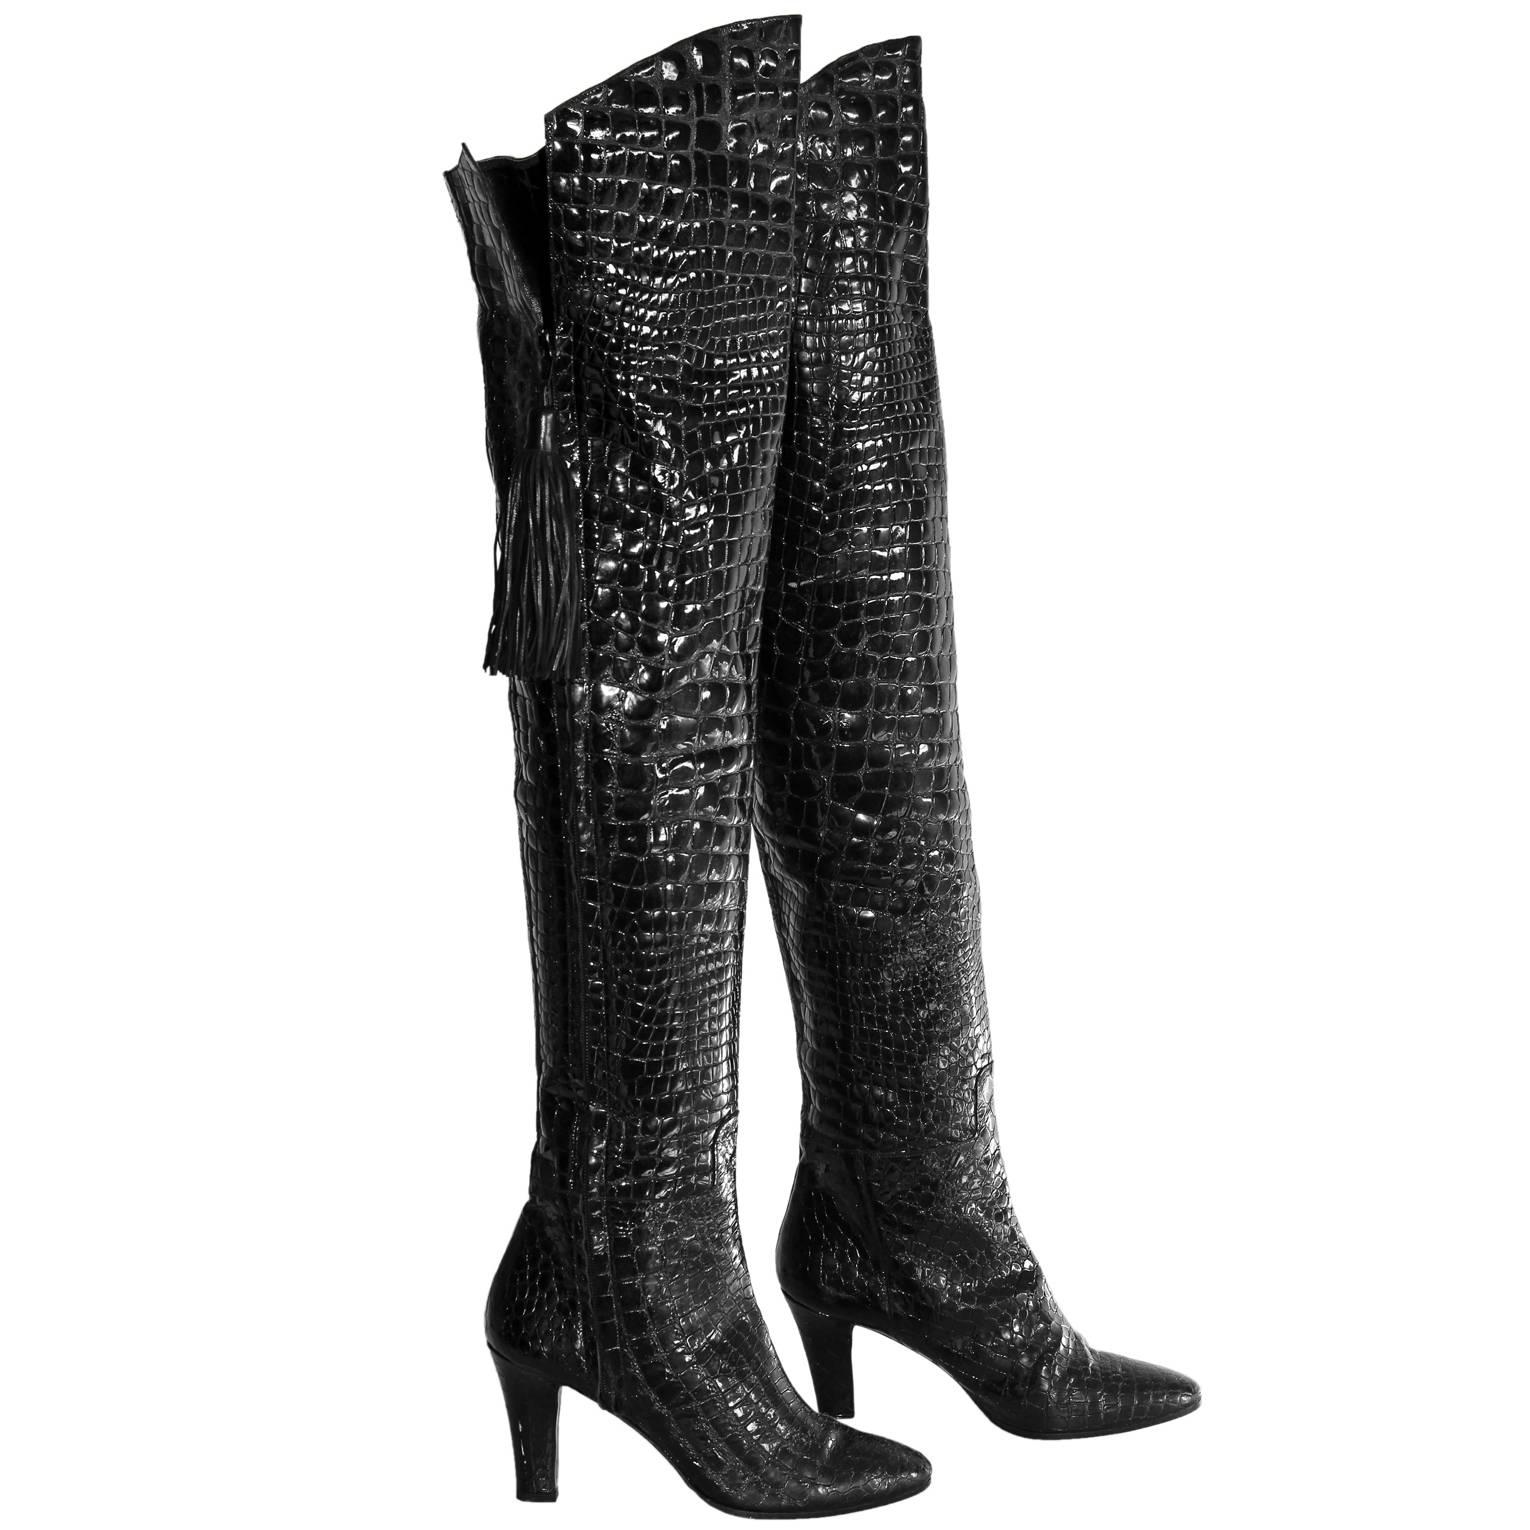 An Amazing Pair Of Yves Saint Laurent YSL Patent Crocodile Leather Thigh Boots! 